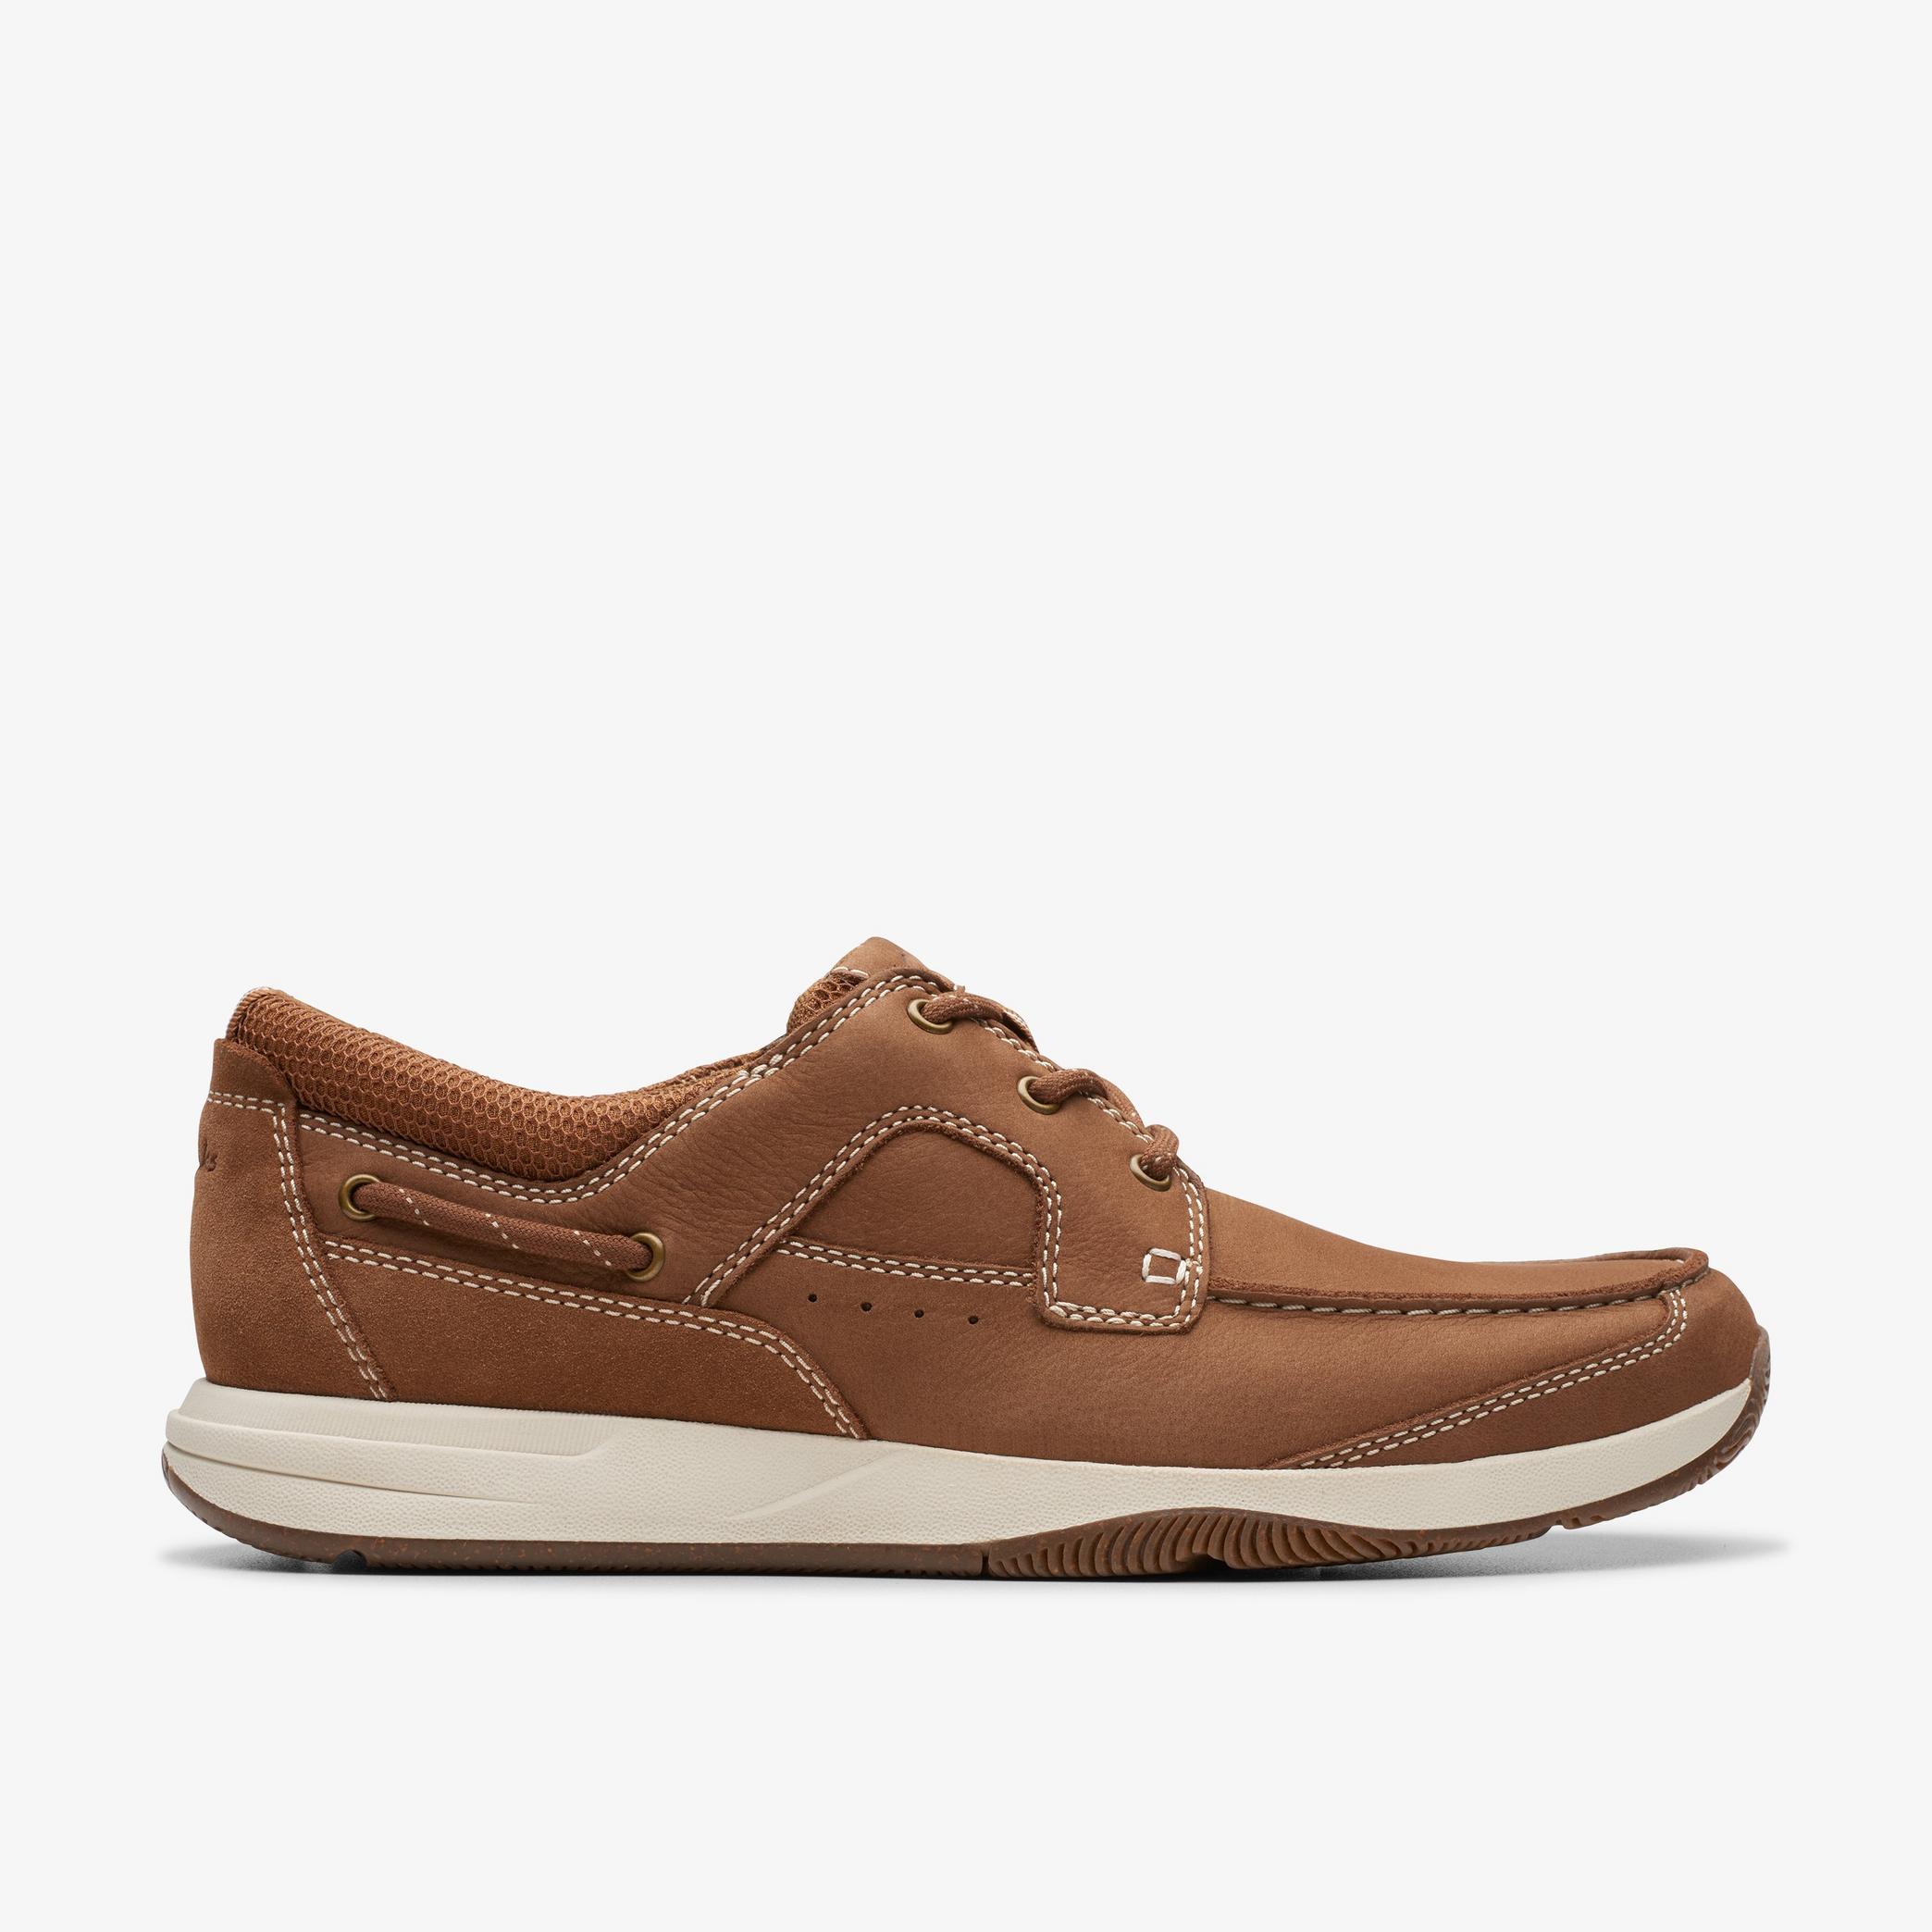 Sailview Lace Light Tan Nubuck Boat Shoes, view 1 of 6